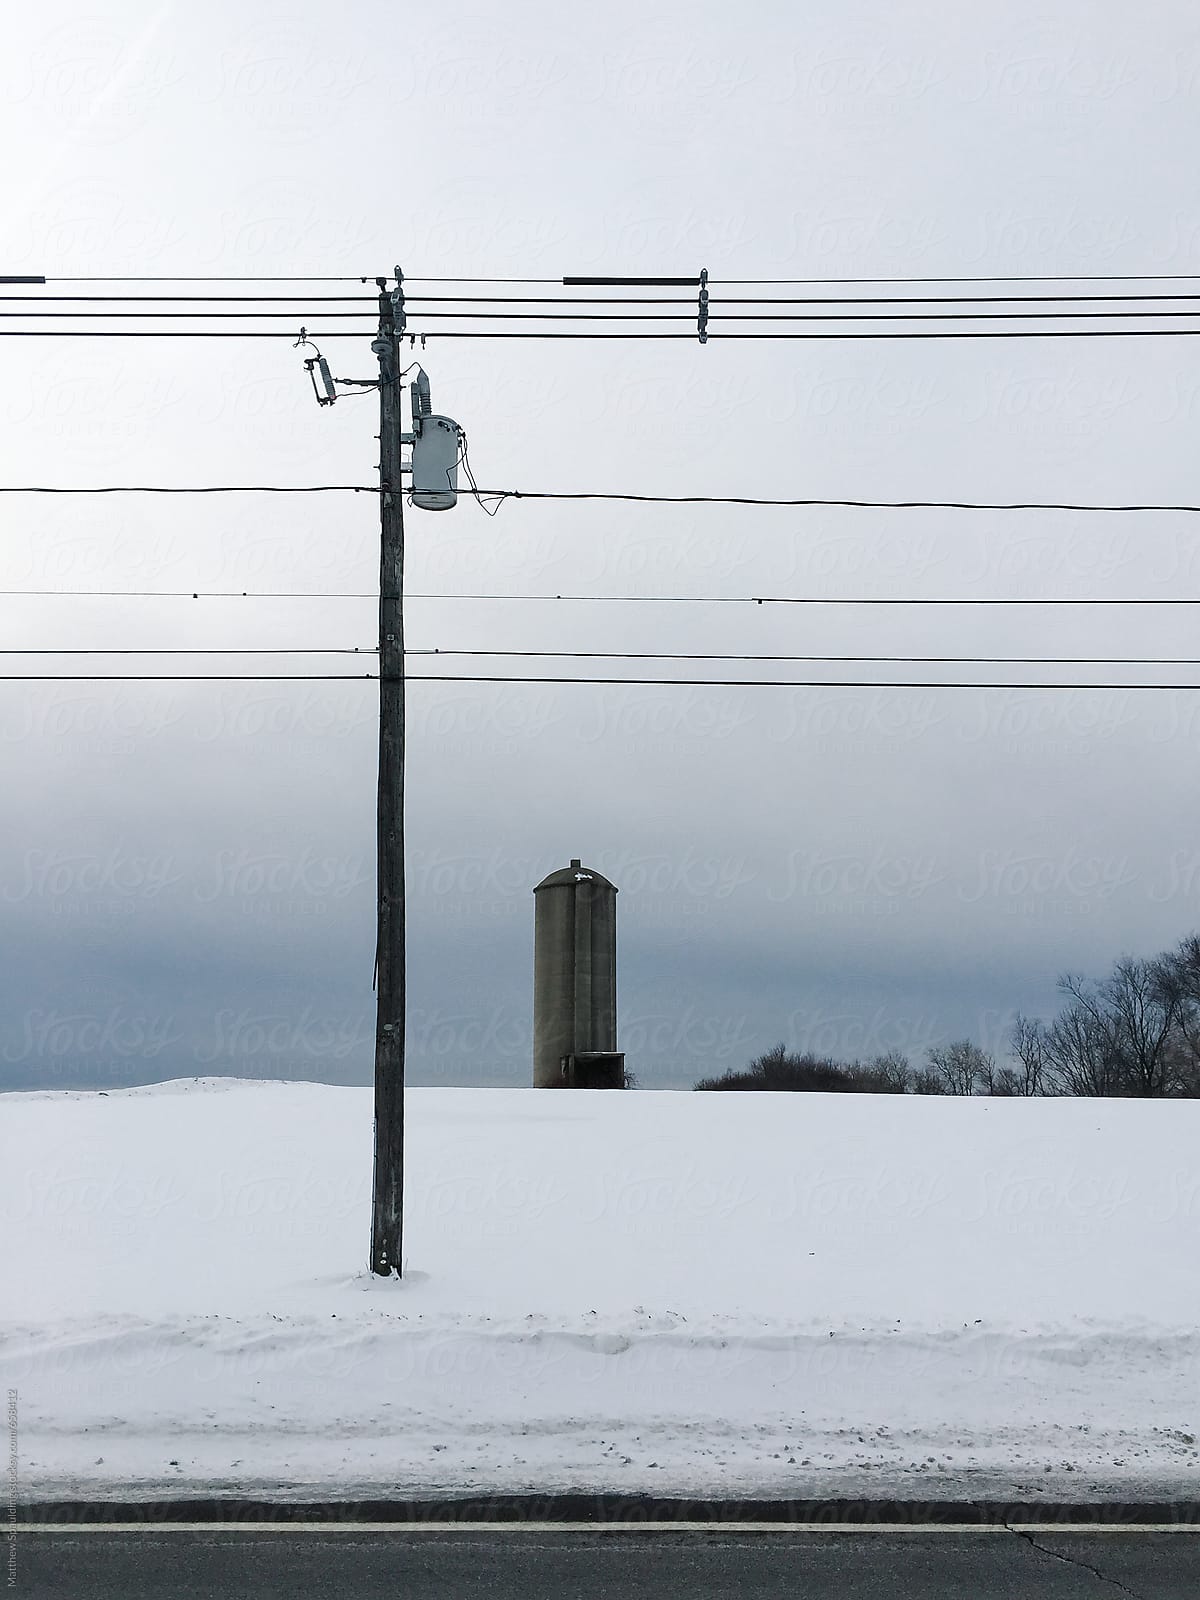 Cement silo telephone wires on roadside in winter